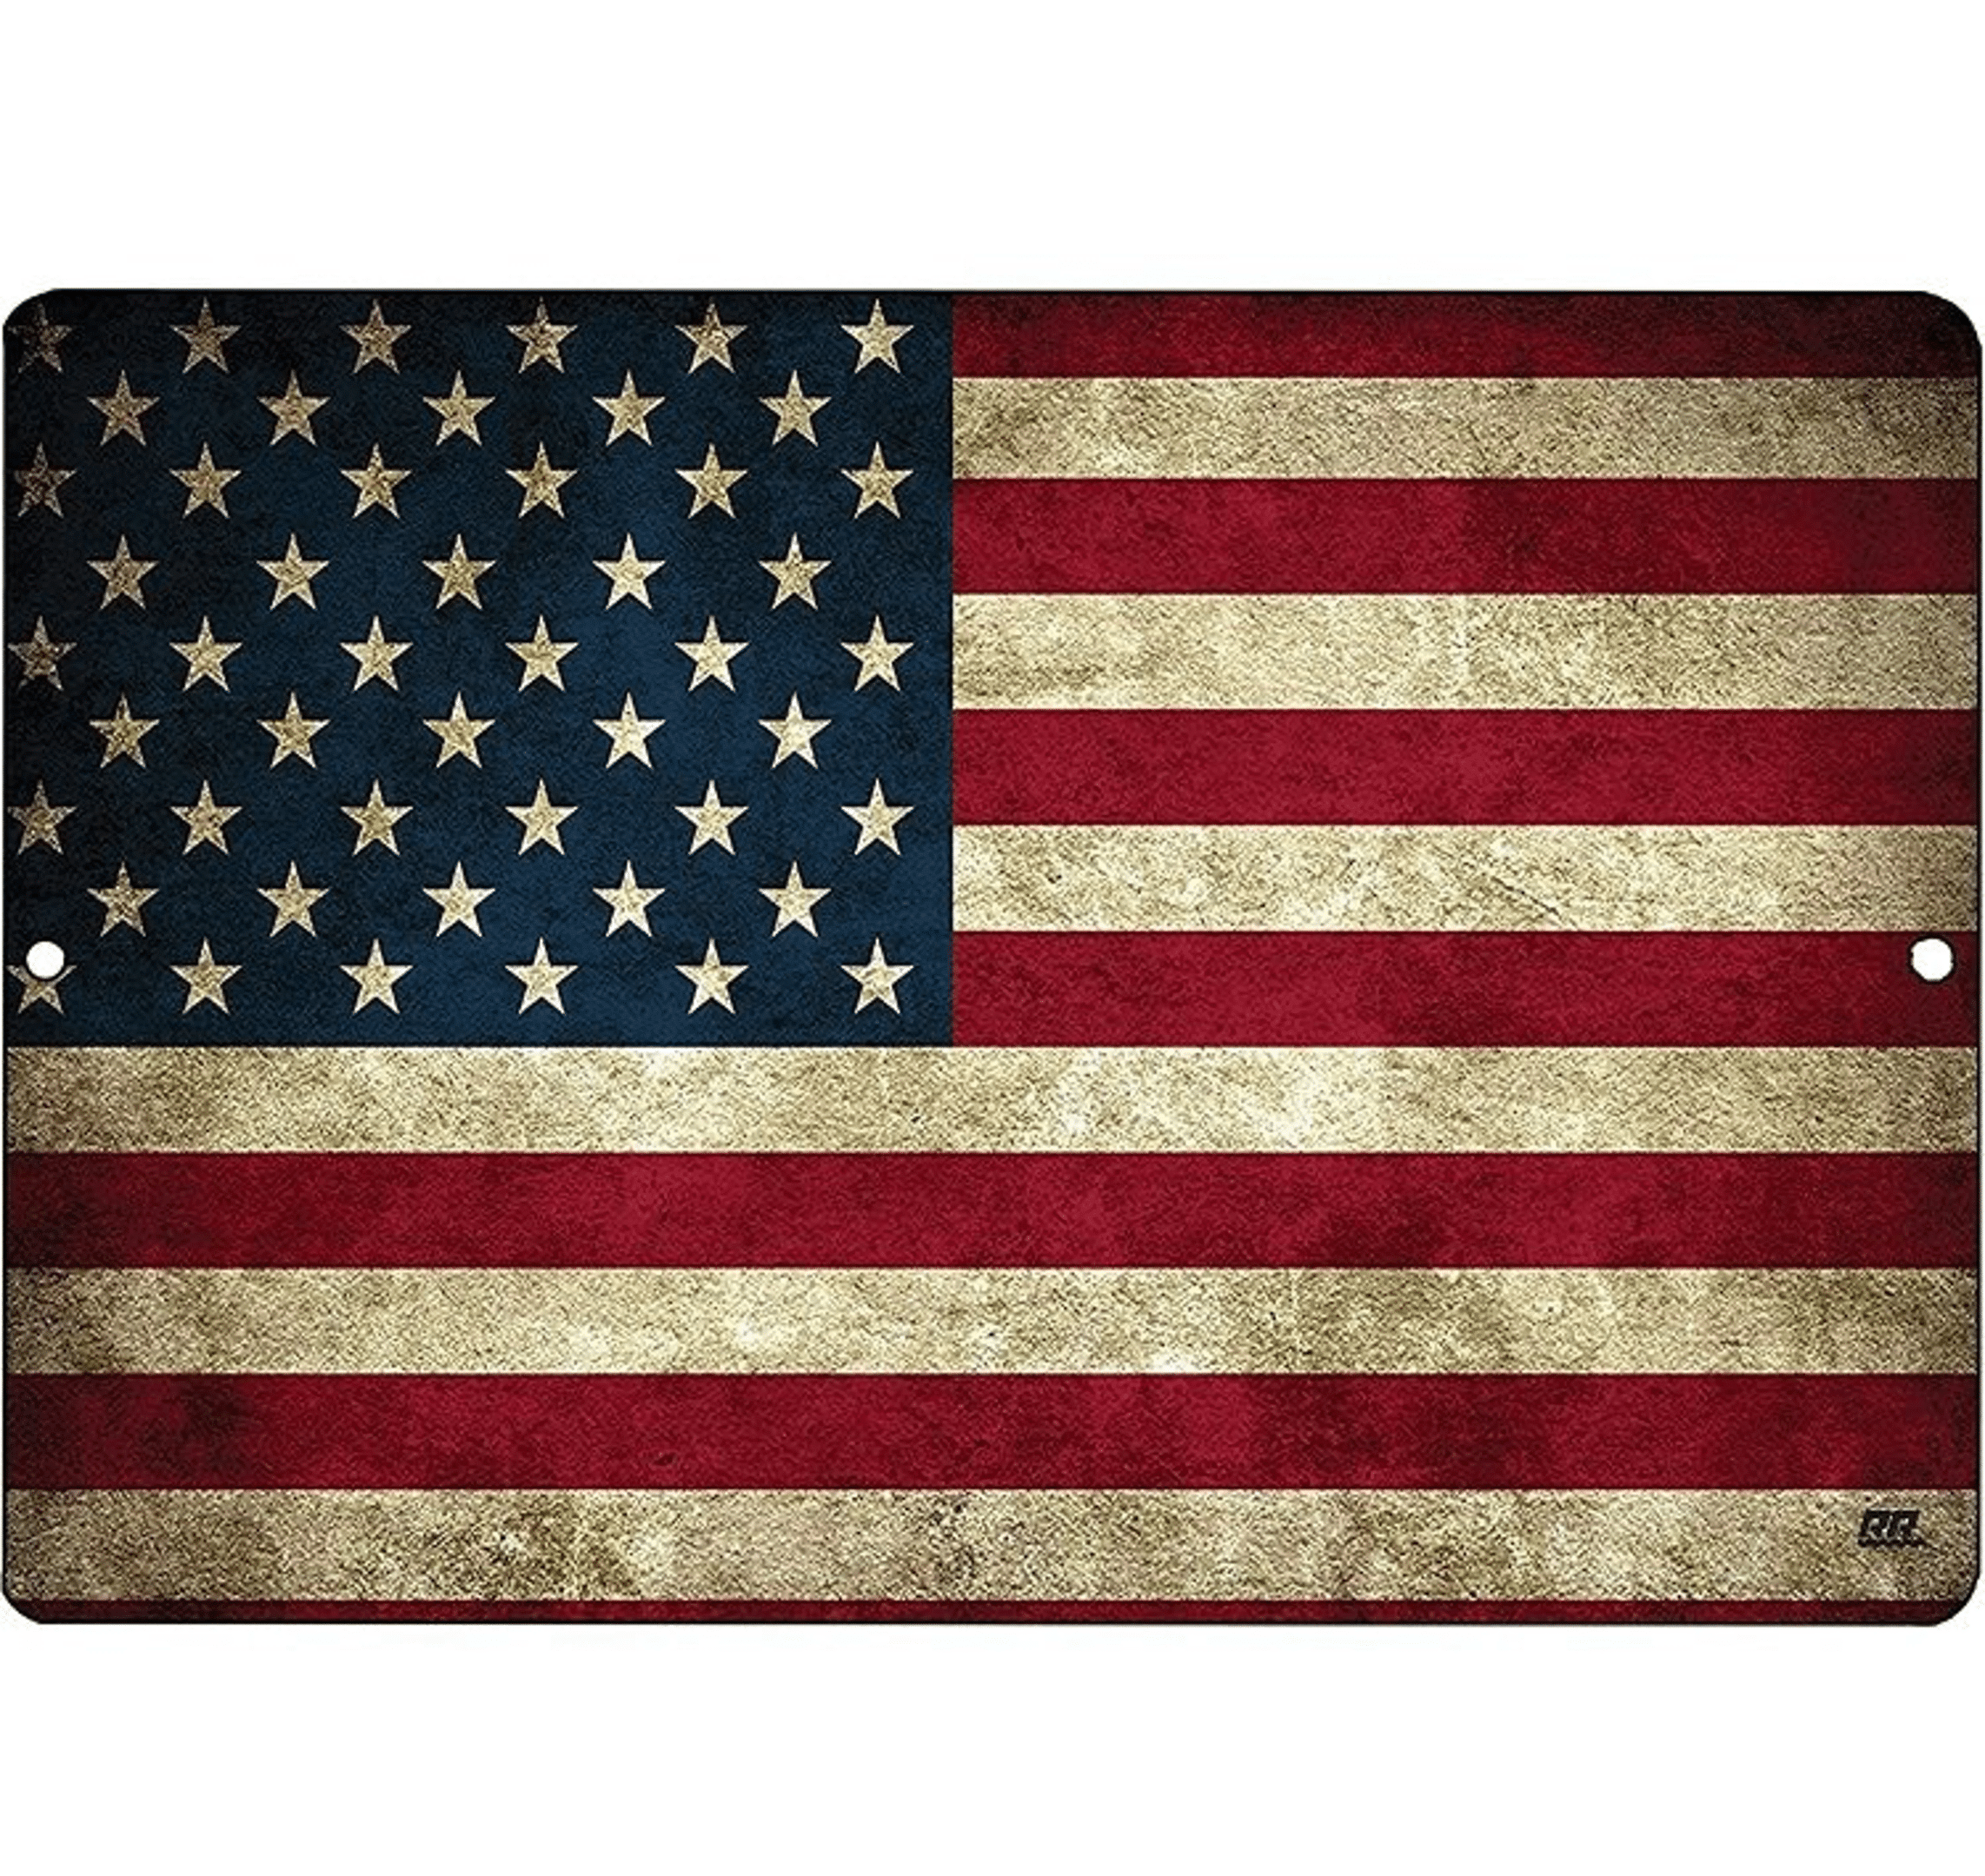 Vintage Tin Sign | USA American Flag Metal Sign | Retro Vintage Bar Kitchen Art Poster | Cave Home Wall Kitchen Decor  inches